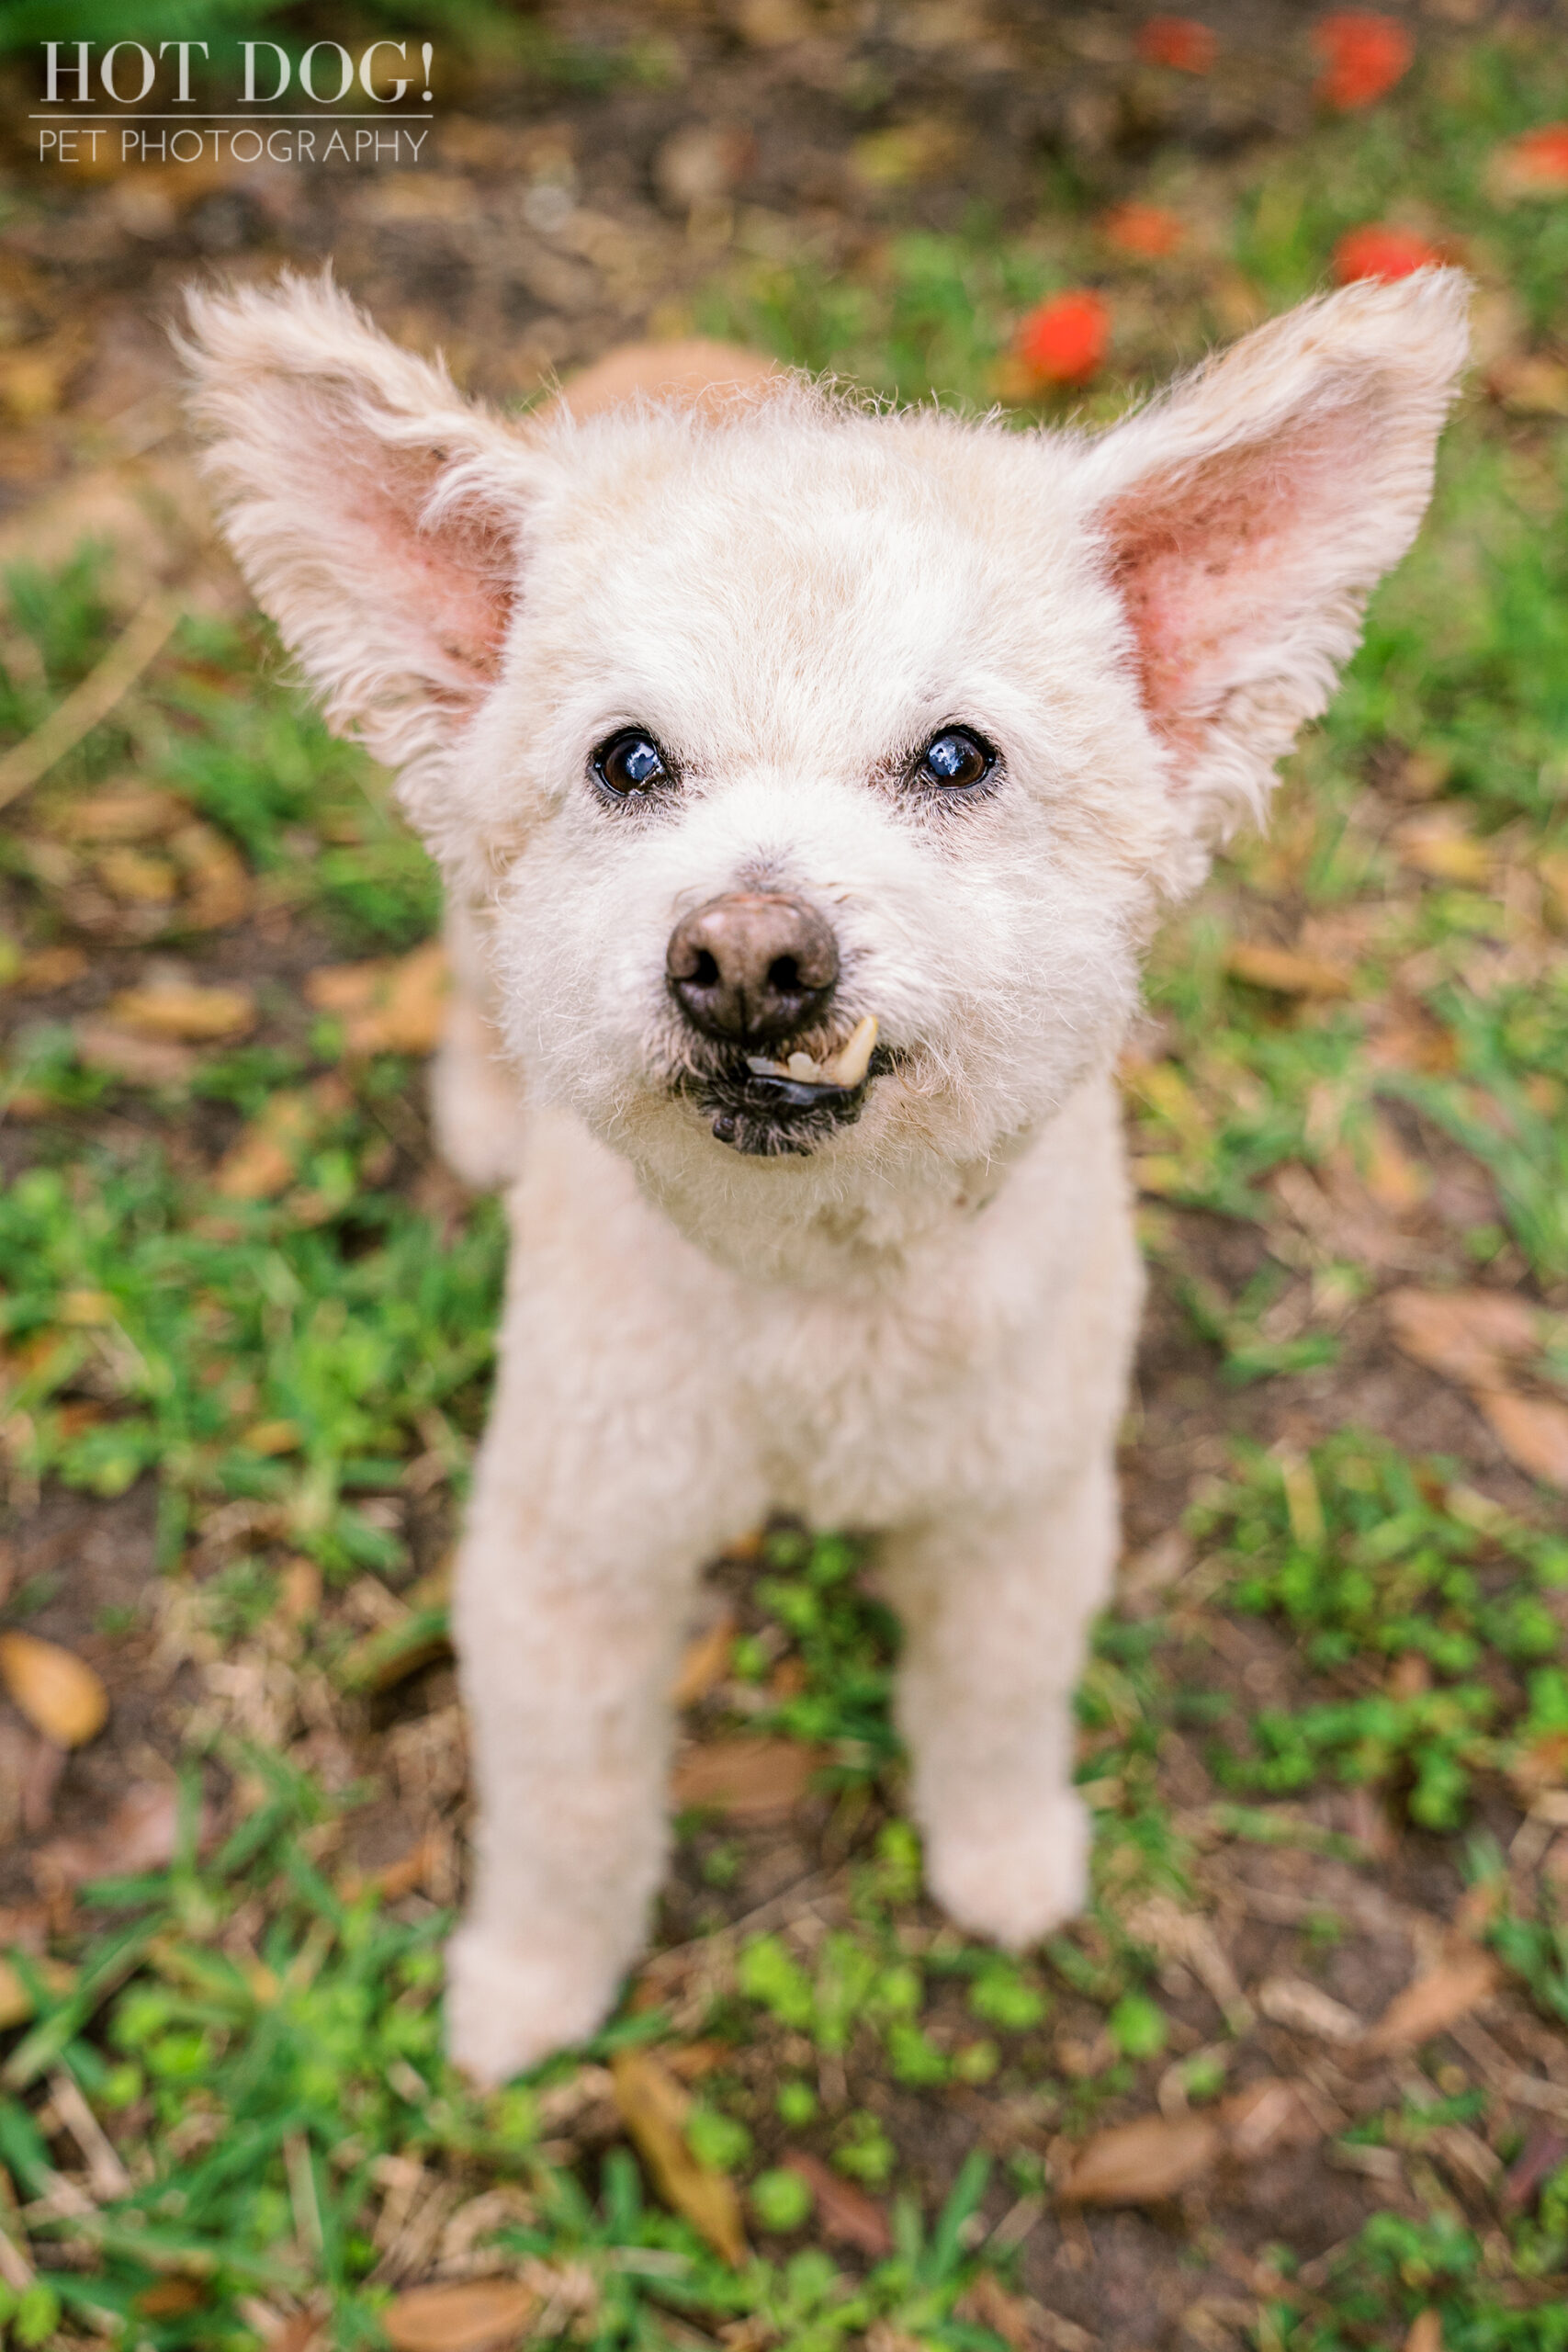 Miley the Terri-Poo mix shows off her adorable snaggletooth.